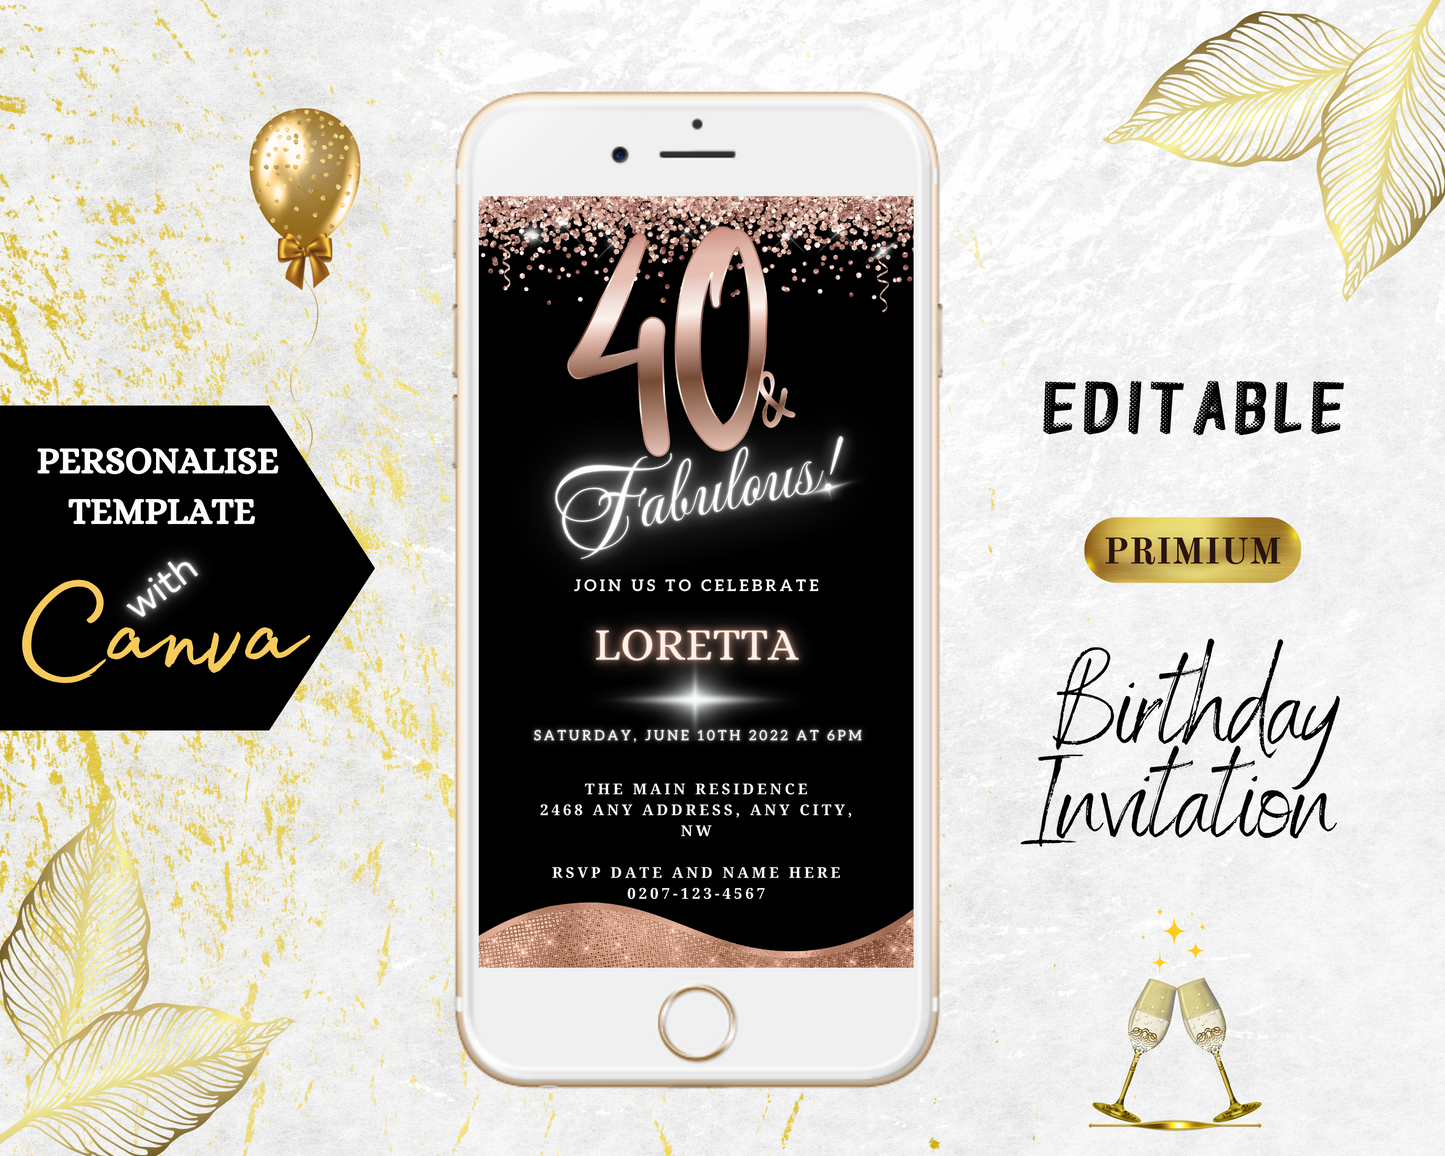 Rose Gold Glitter Black | 40 & Fabulous Party Evite: A customizable digital invitation with elegant black and gold accents, featuring editable text for your smartphone.